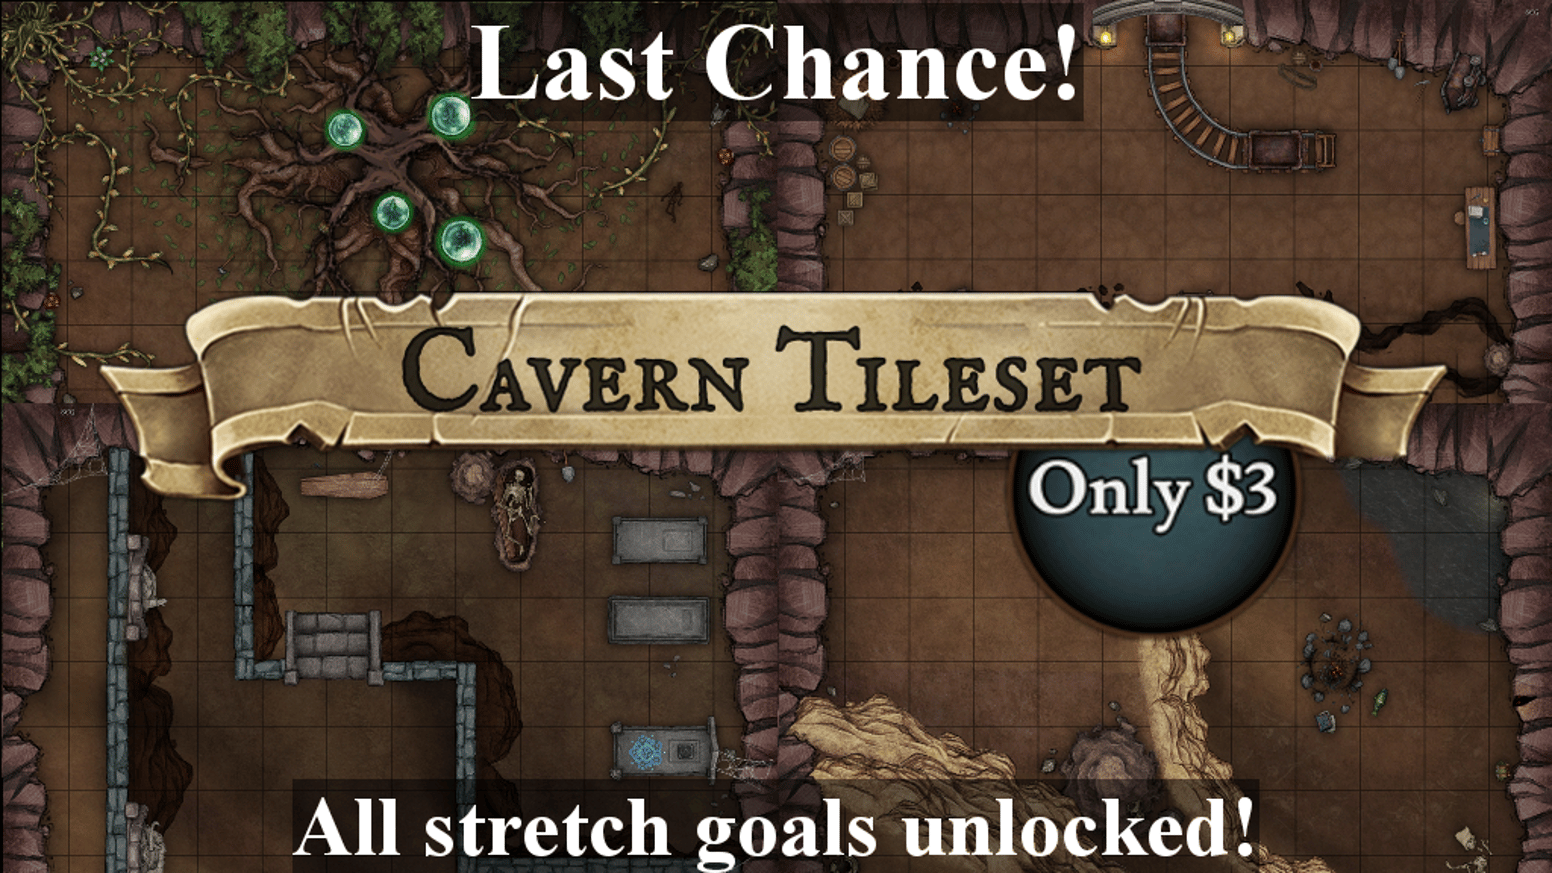 100 battle map tiles! TY Backers! Craft cavern settings for your favorite roleplaying game. Usable with roll20, VTT, ttrpg, and dnd!